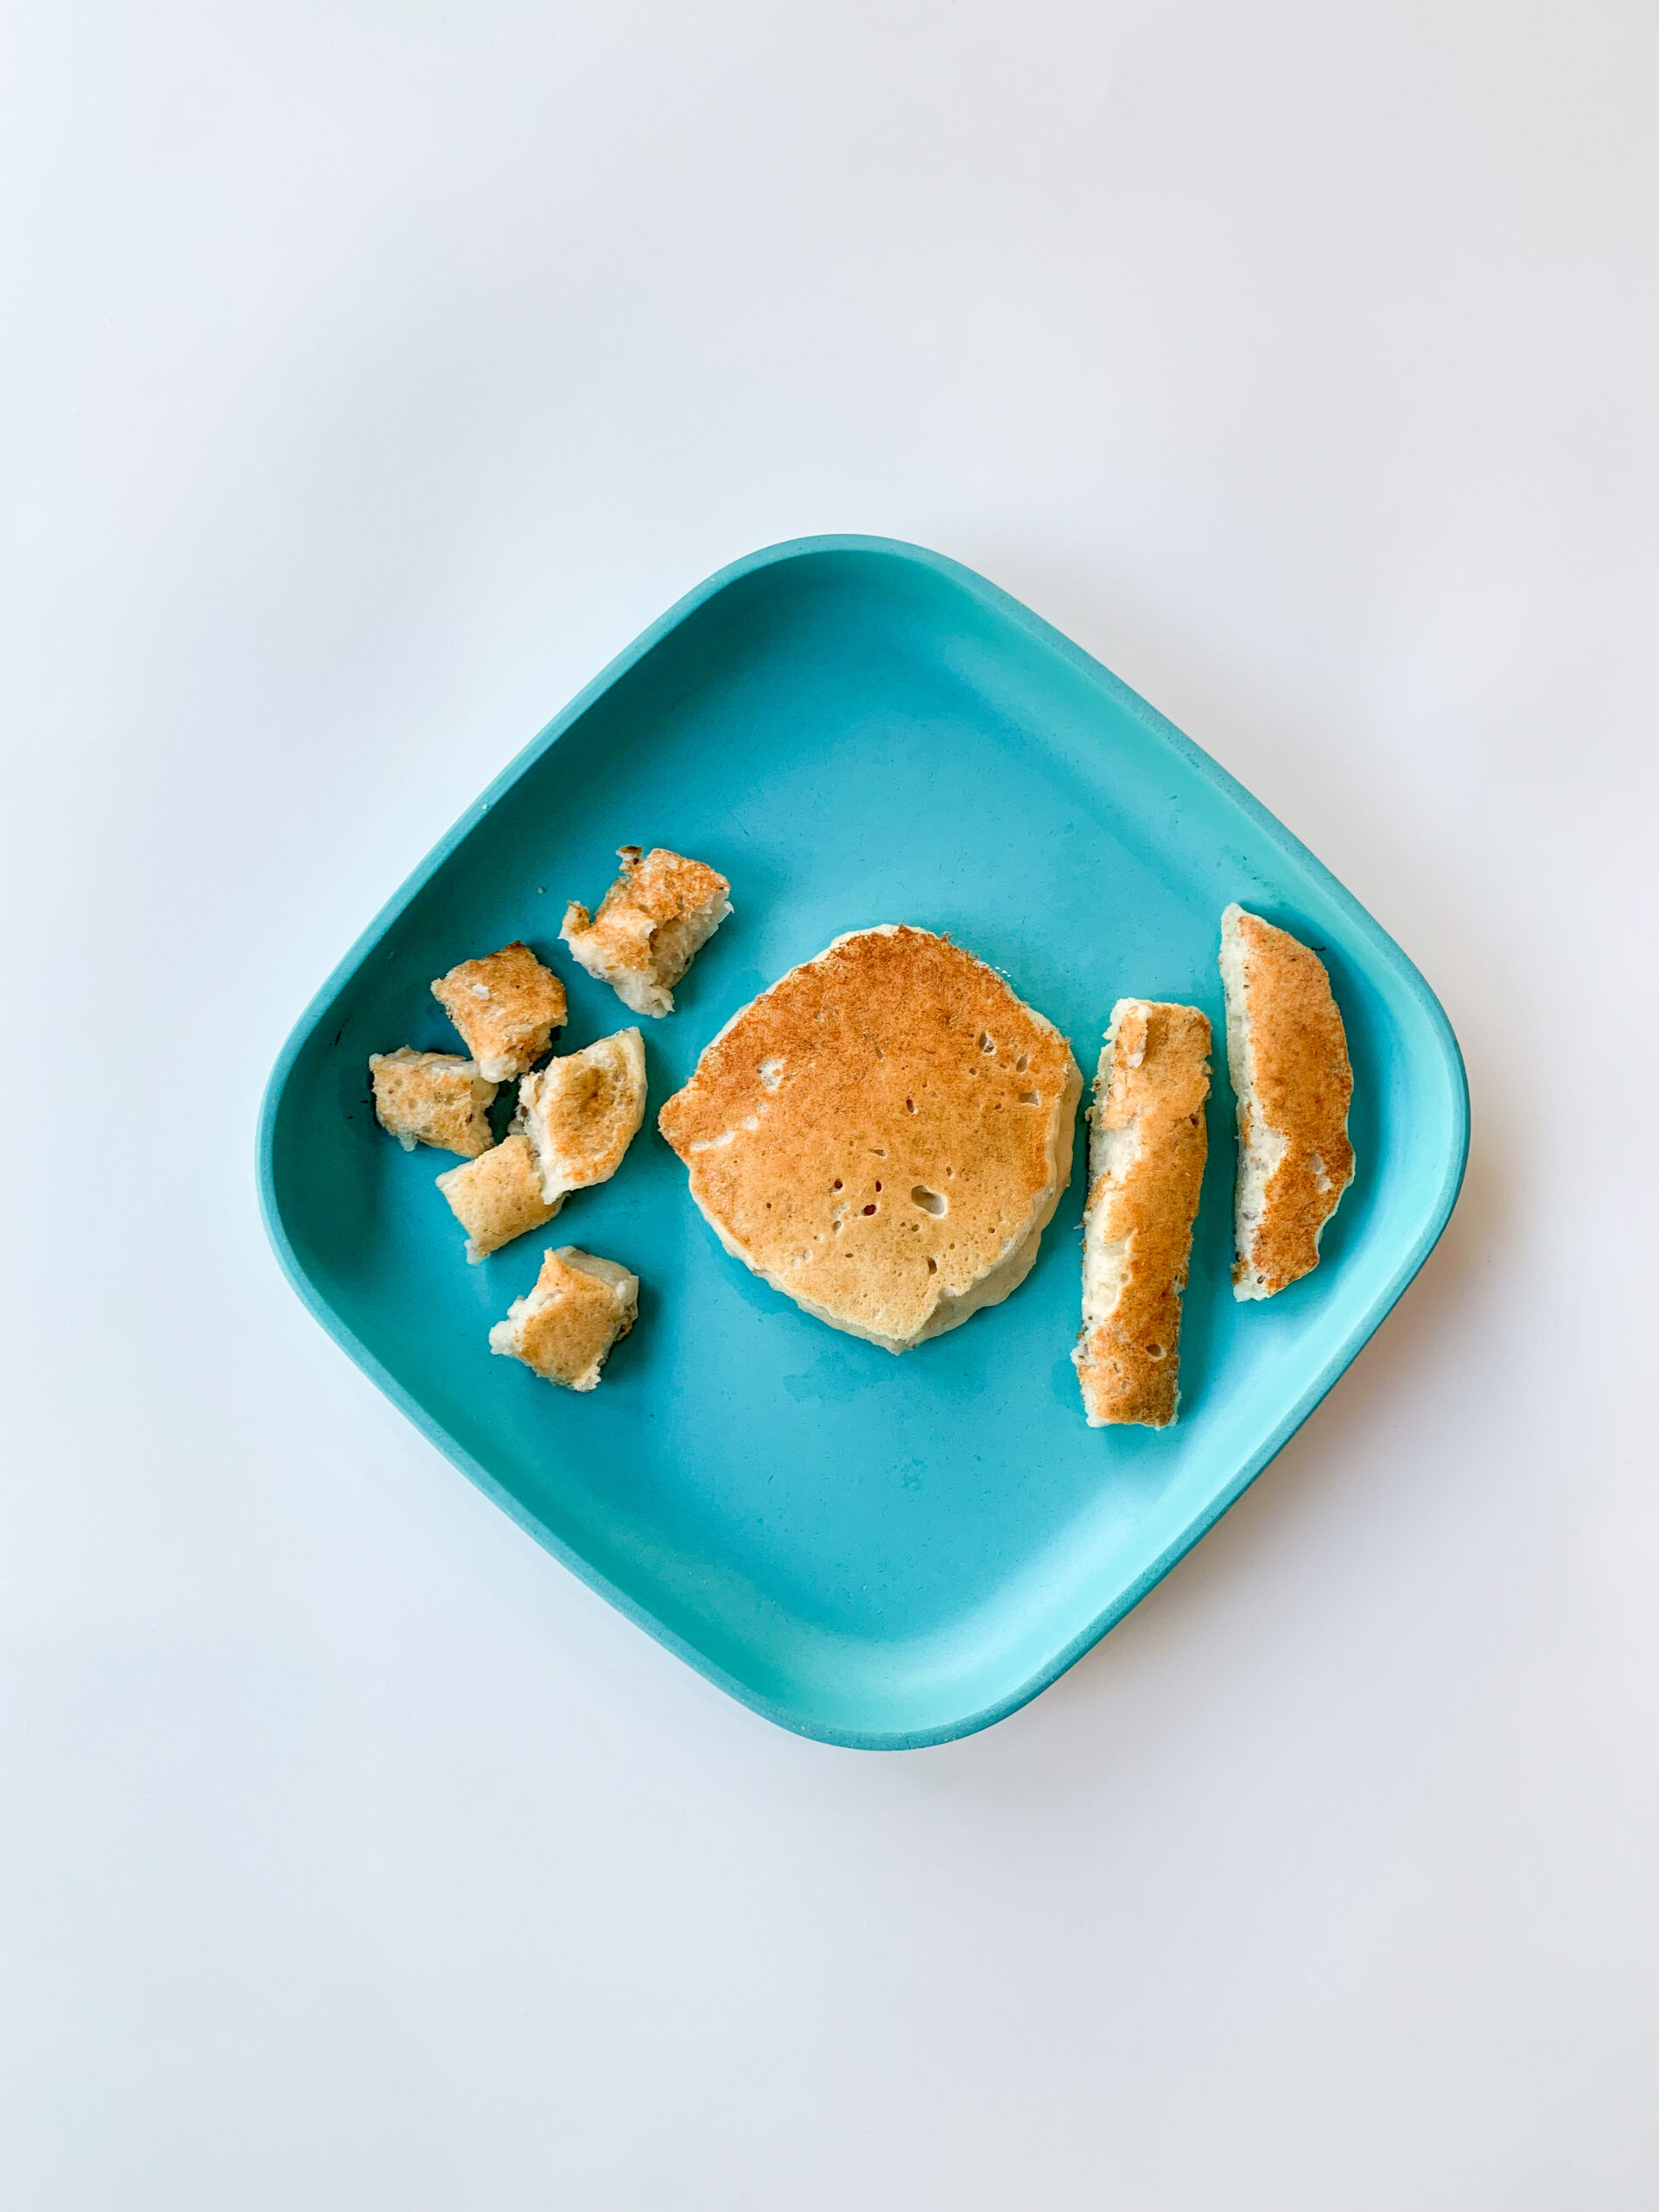 Pancakes for Baby-Led Weaning – Sarah Remmer, RD